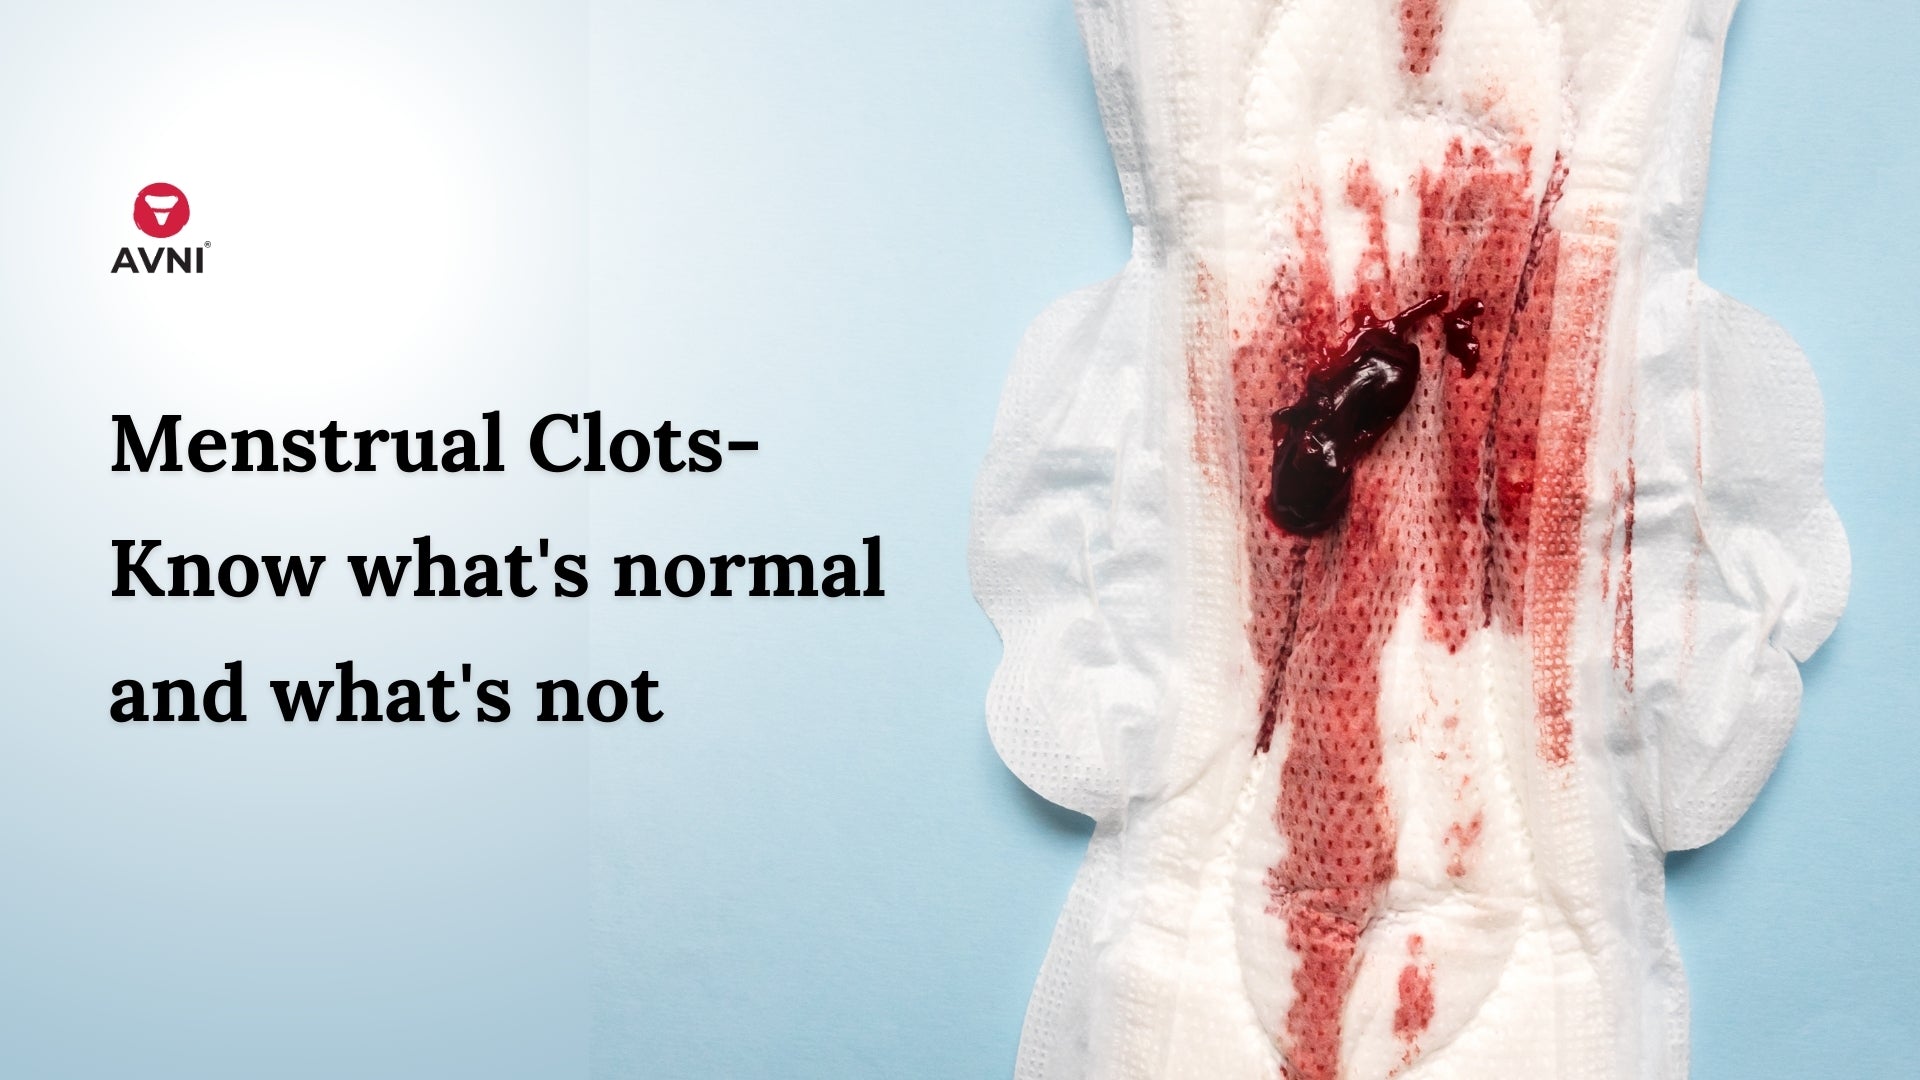 huge blood clots during period –